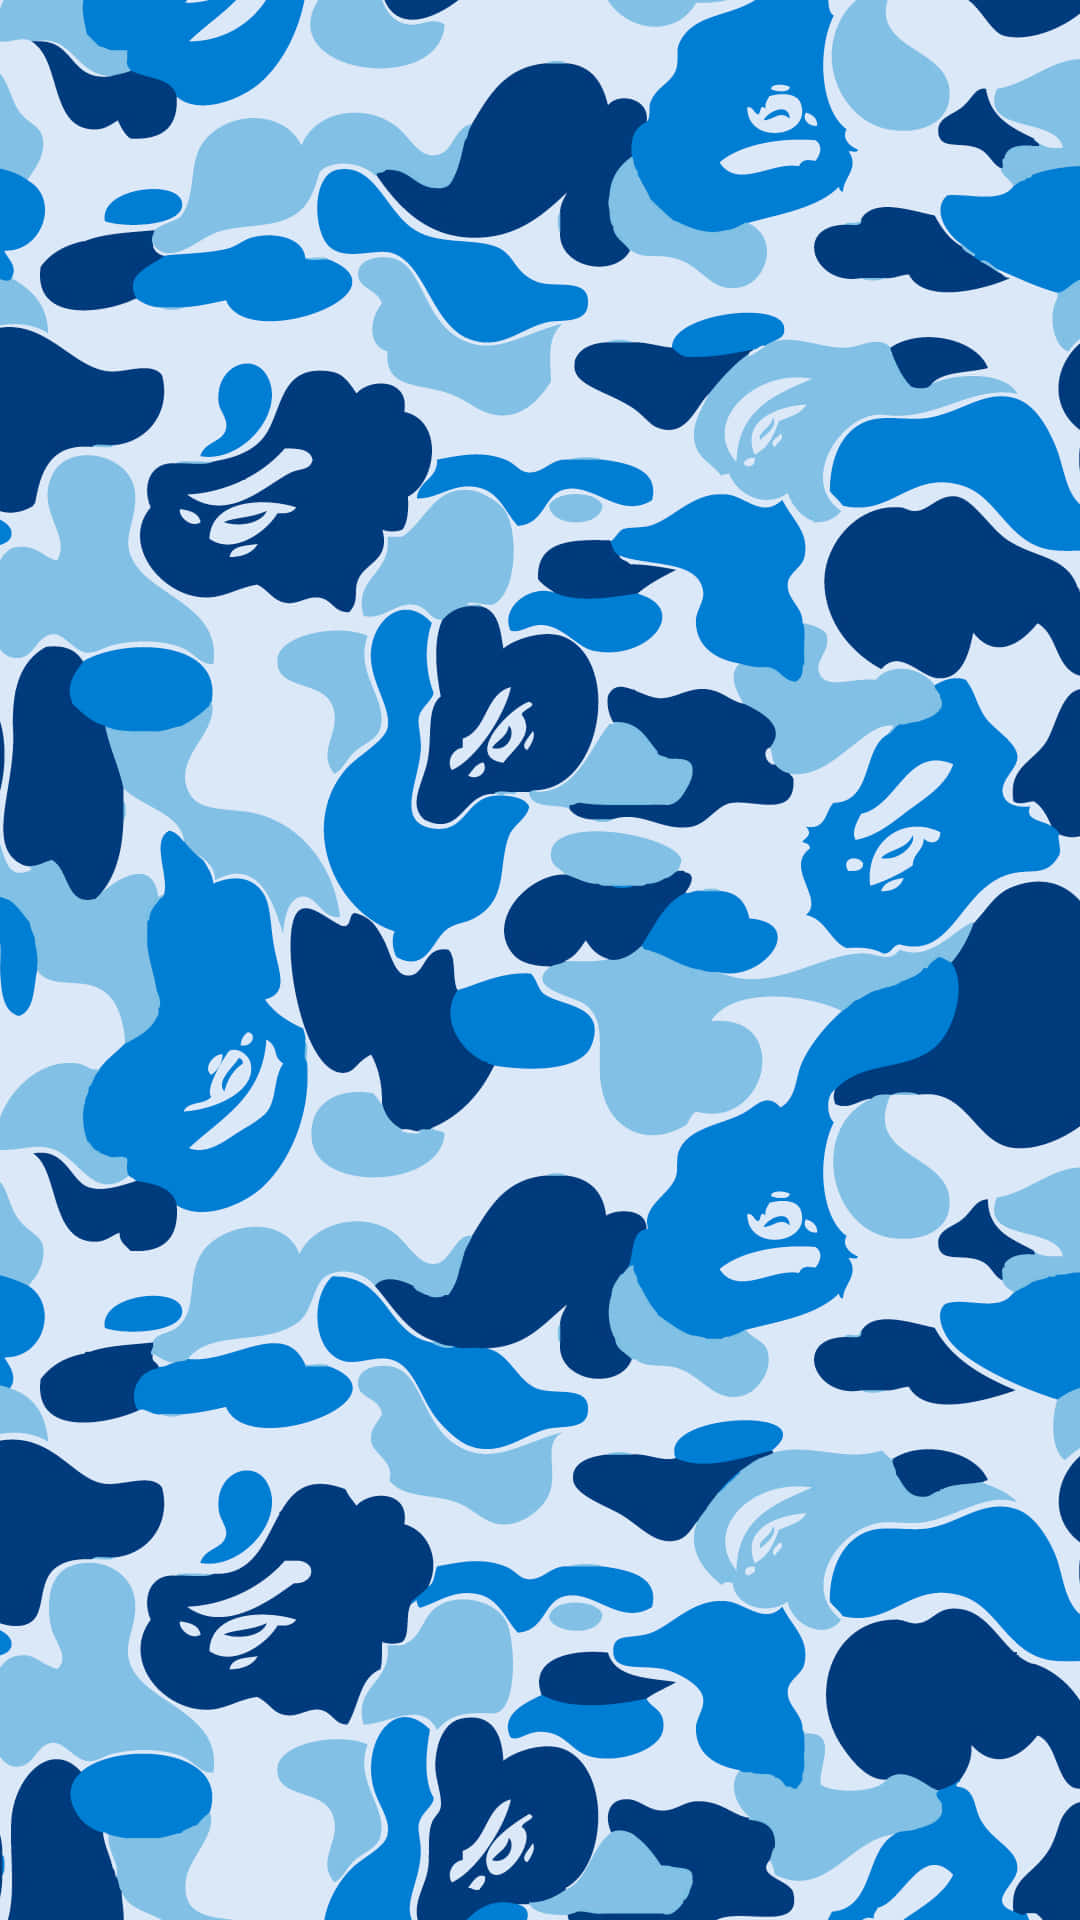 Upgrade Your Style with a Bape Camo Look Wallpaper